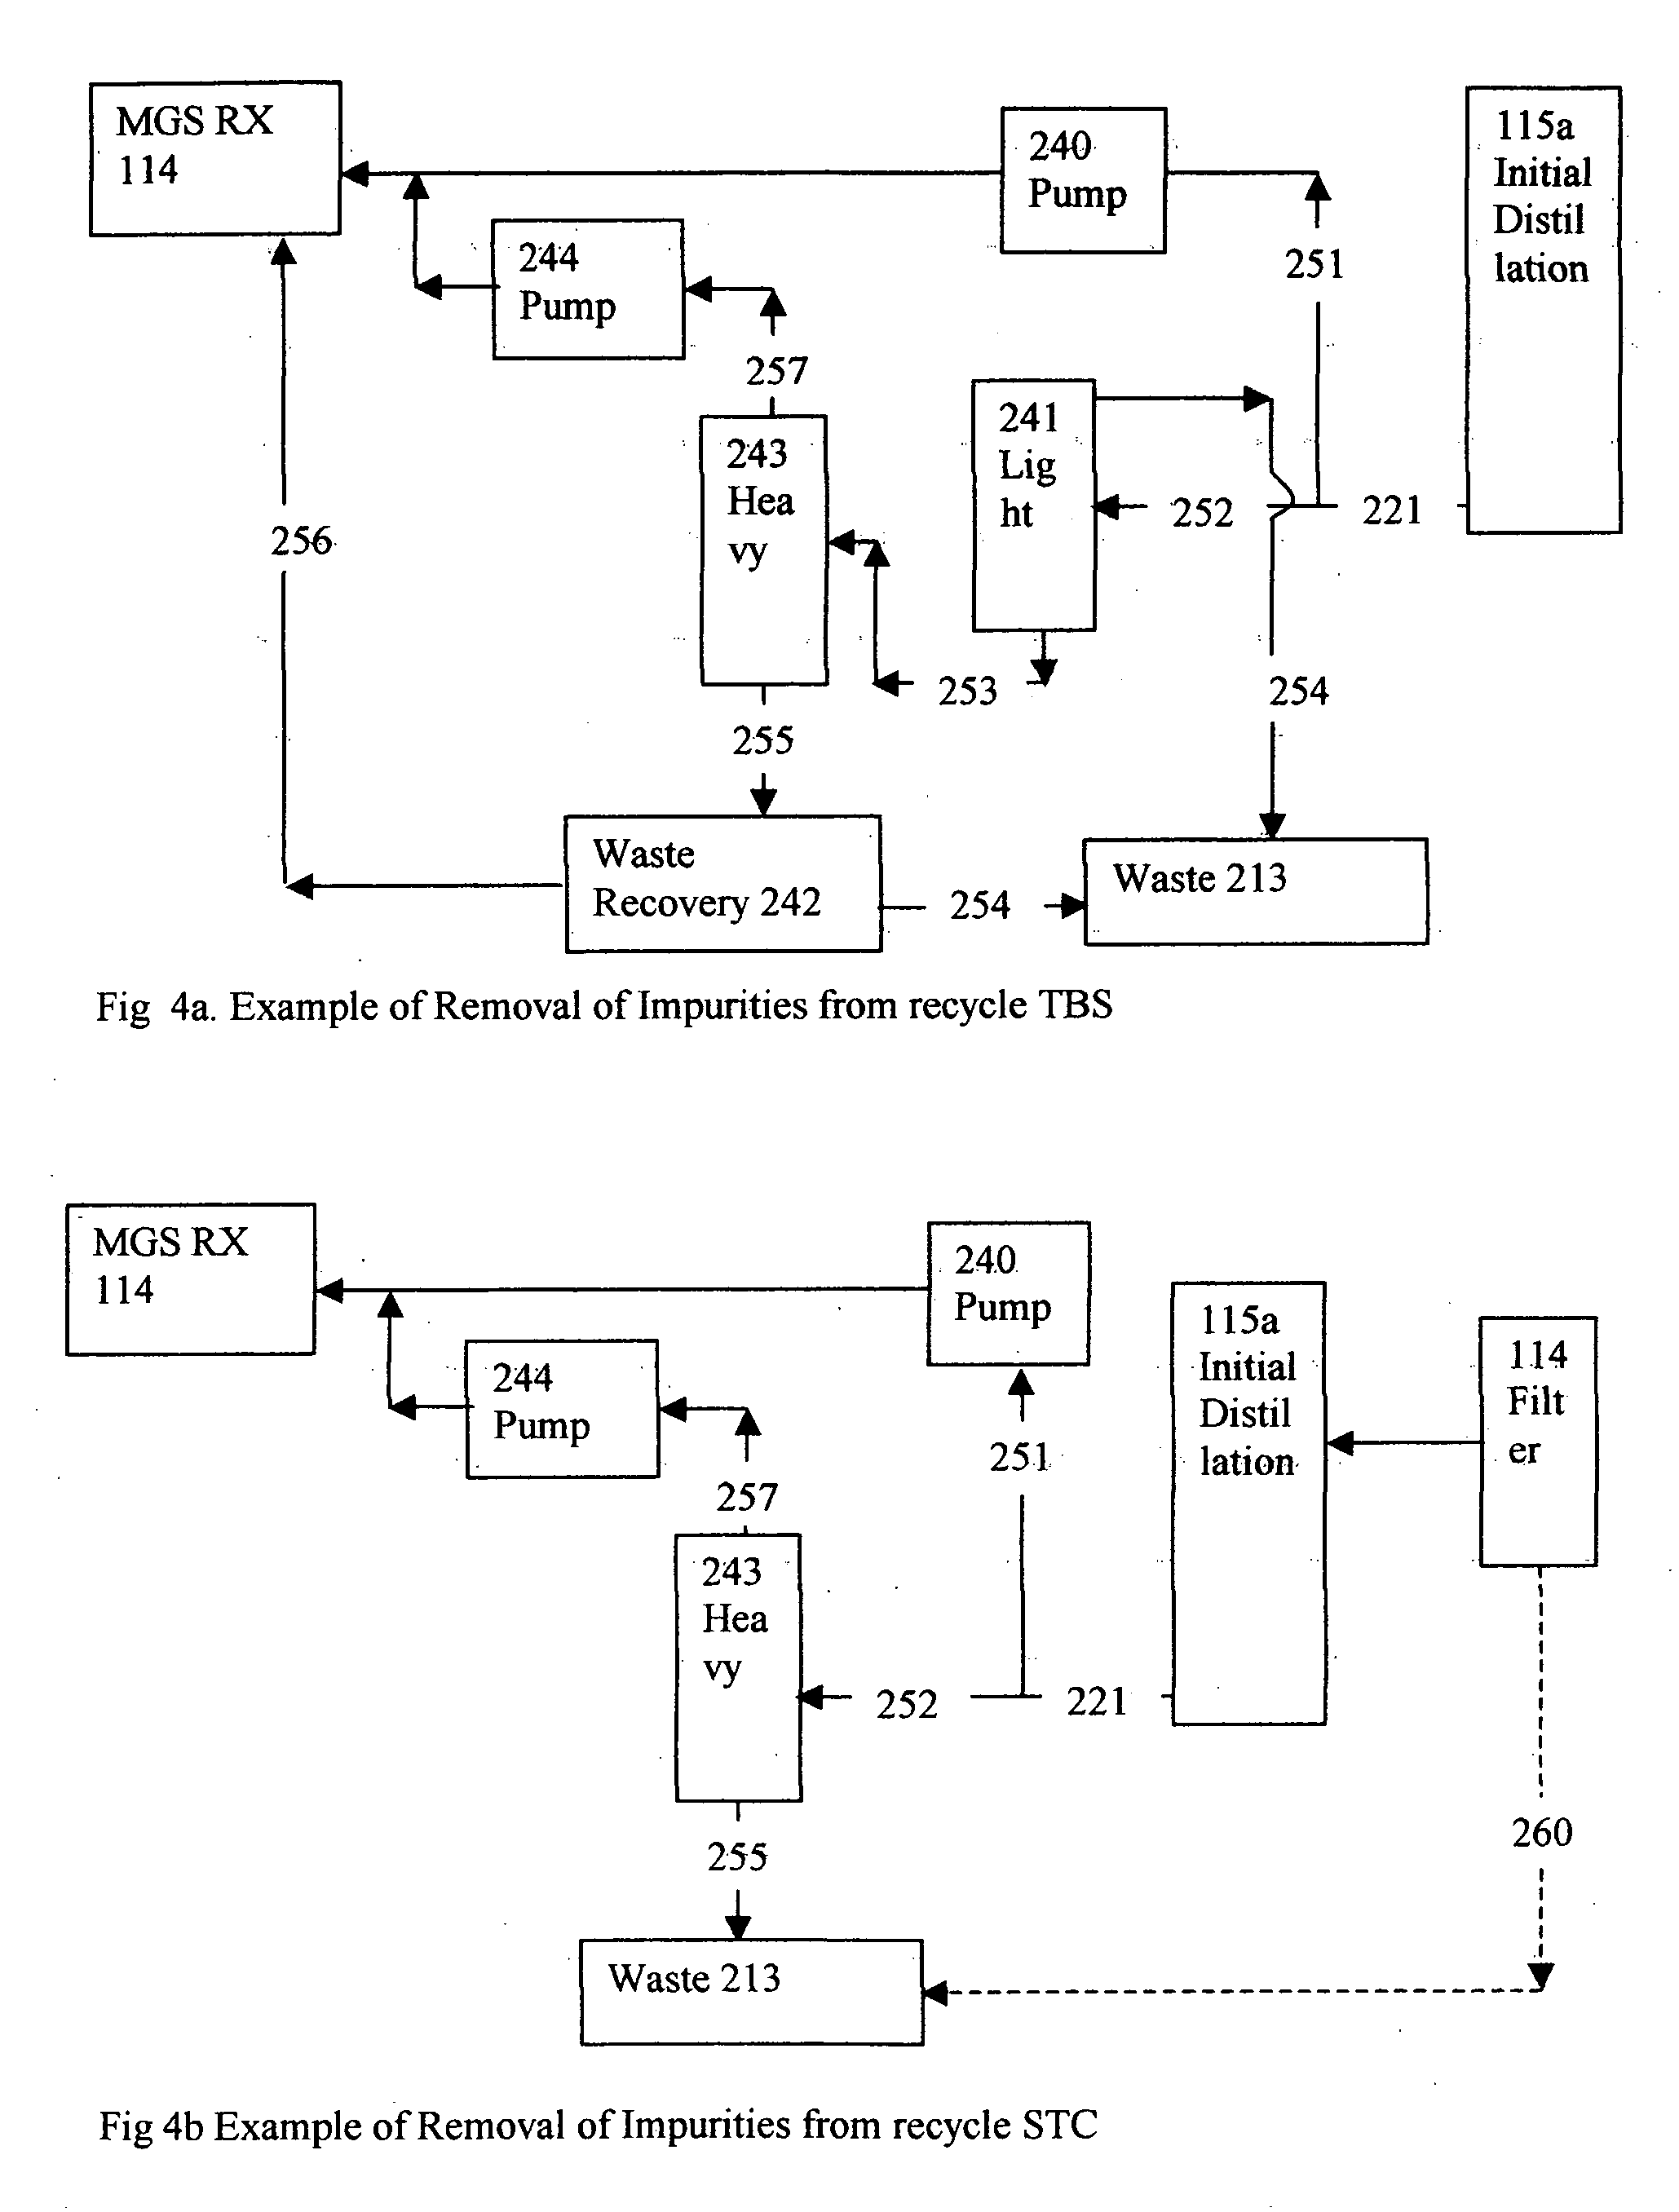 Set of processes for removing impurities from a silcon production facility